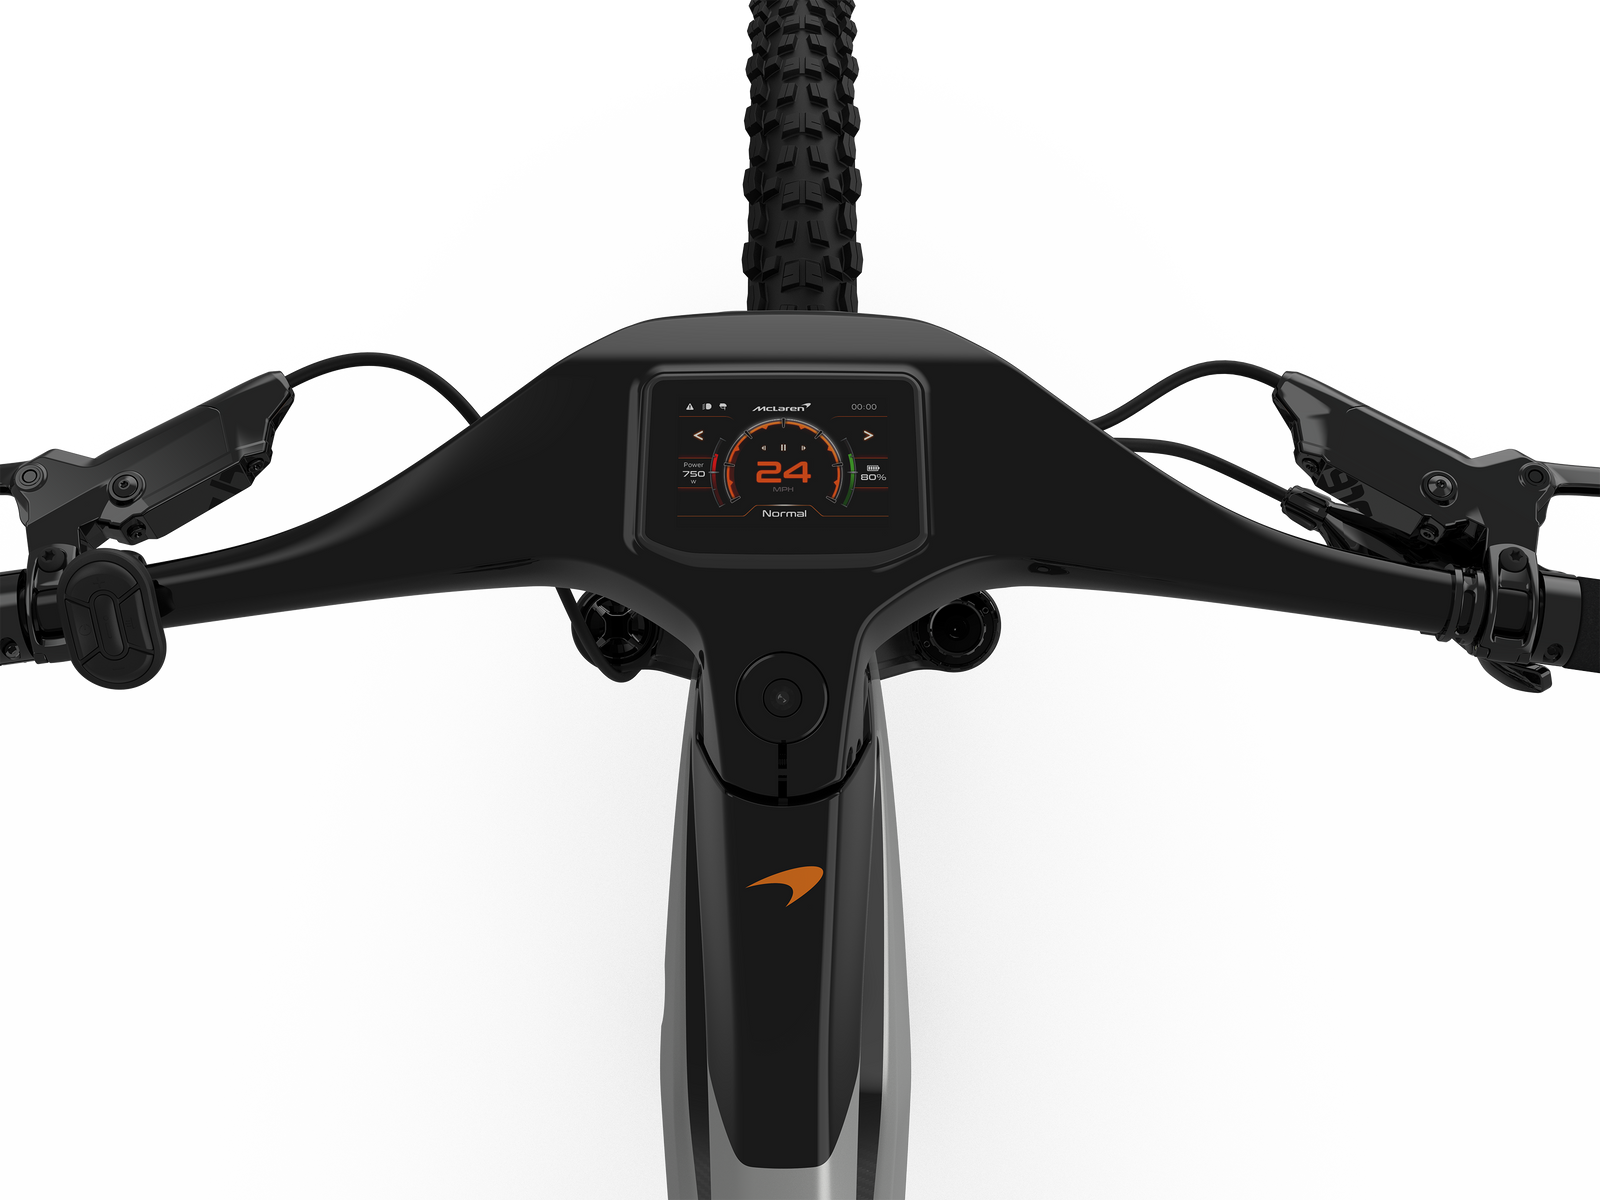 Overhead close-up view of the HD digital display unit on the 600w McLaren 29er hardtail e-MTB featuring a carbon frame wrapped in 3k carbon for a premium automobile-quality finish. 